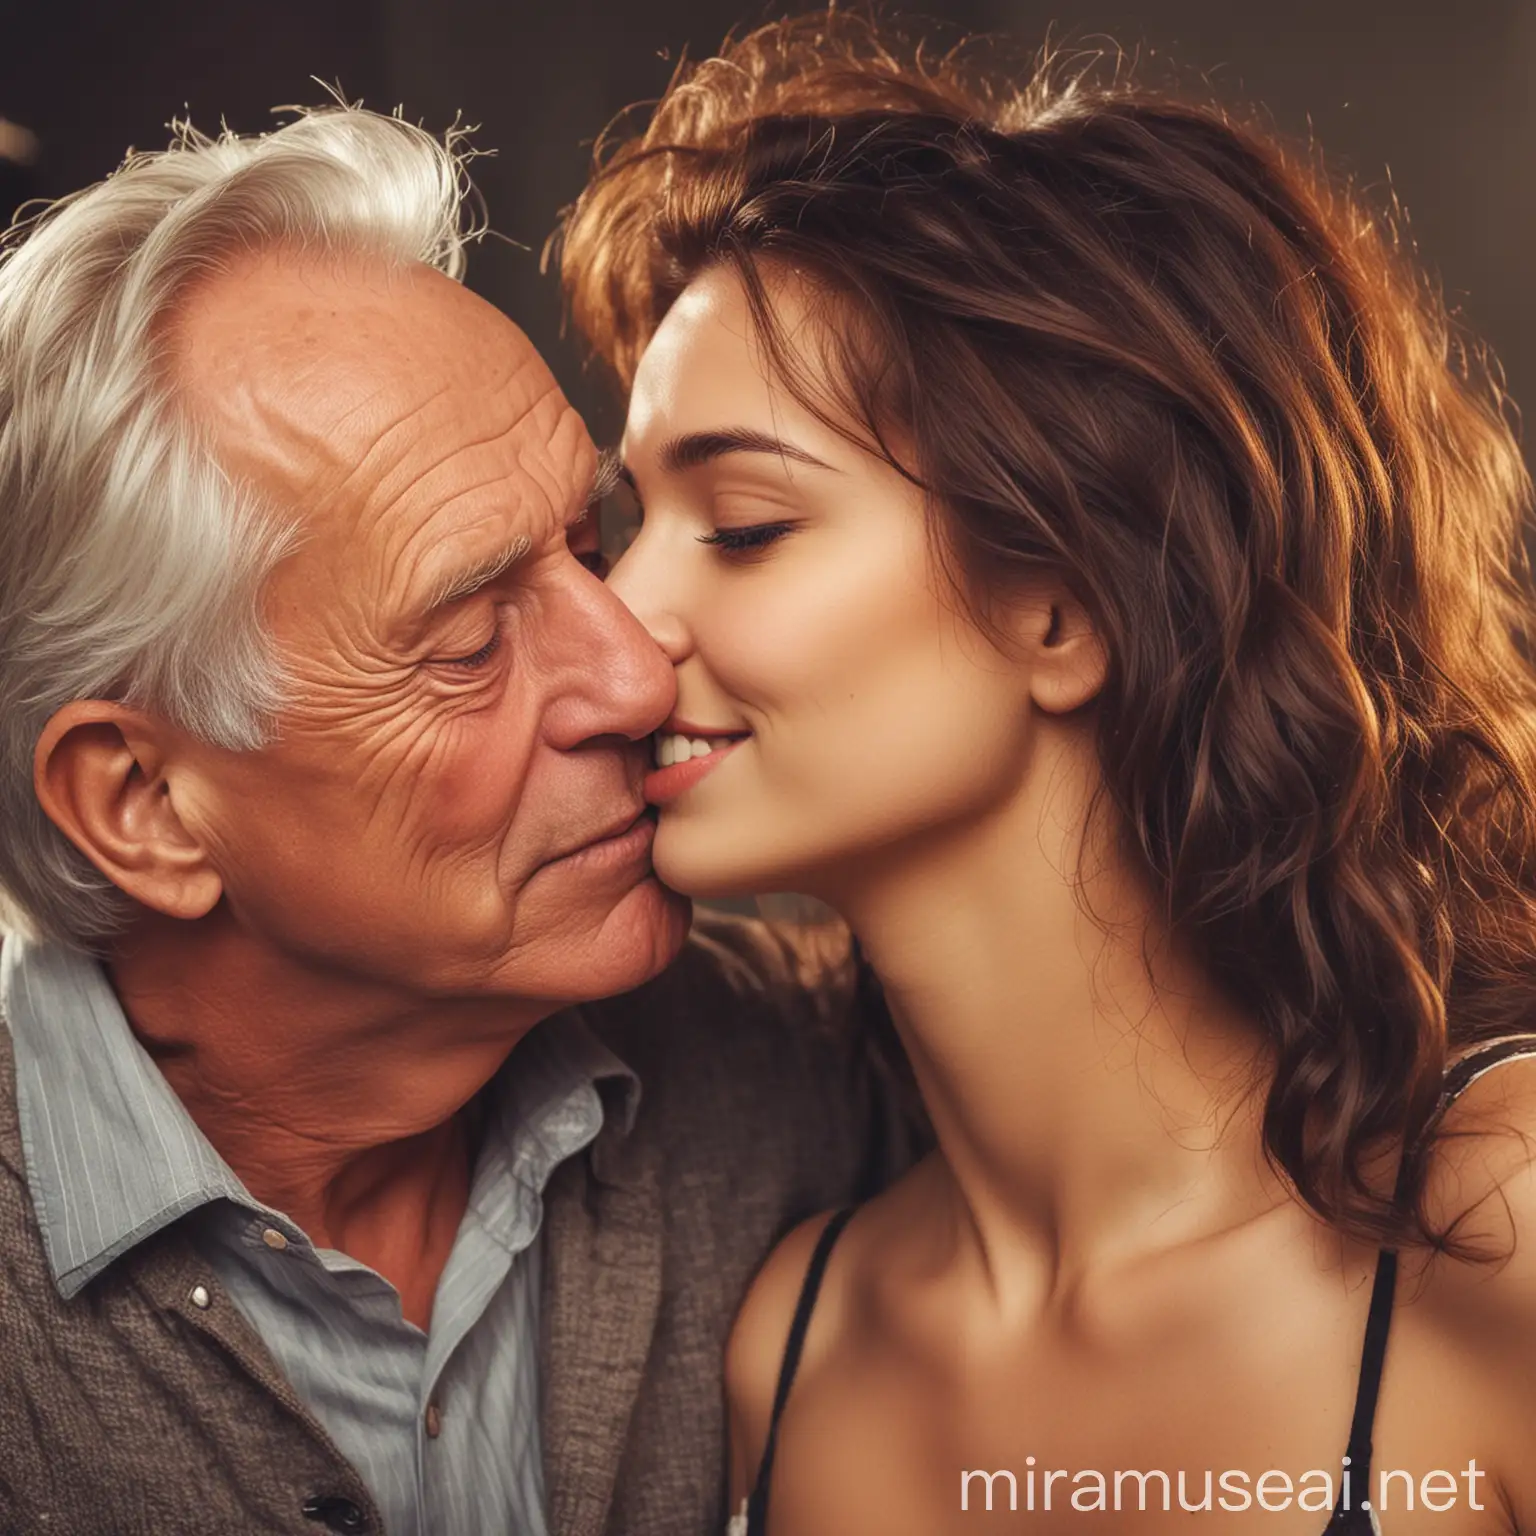 young women with older man fall in love